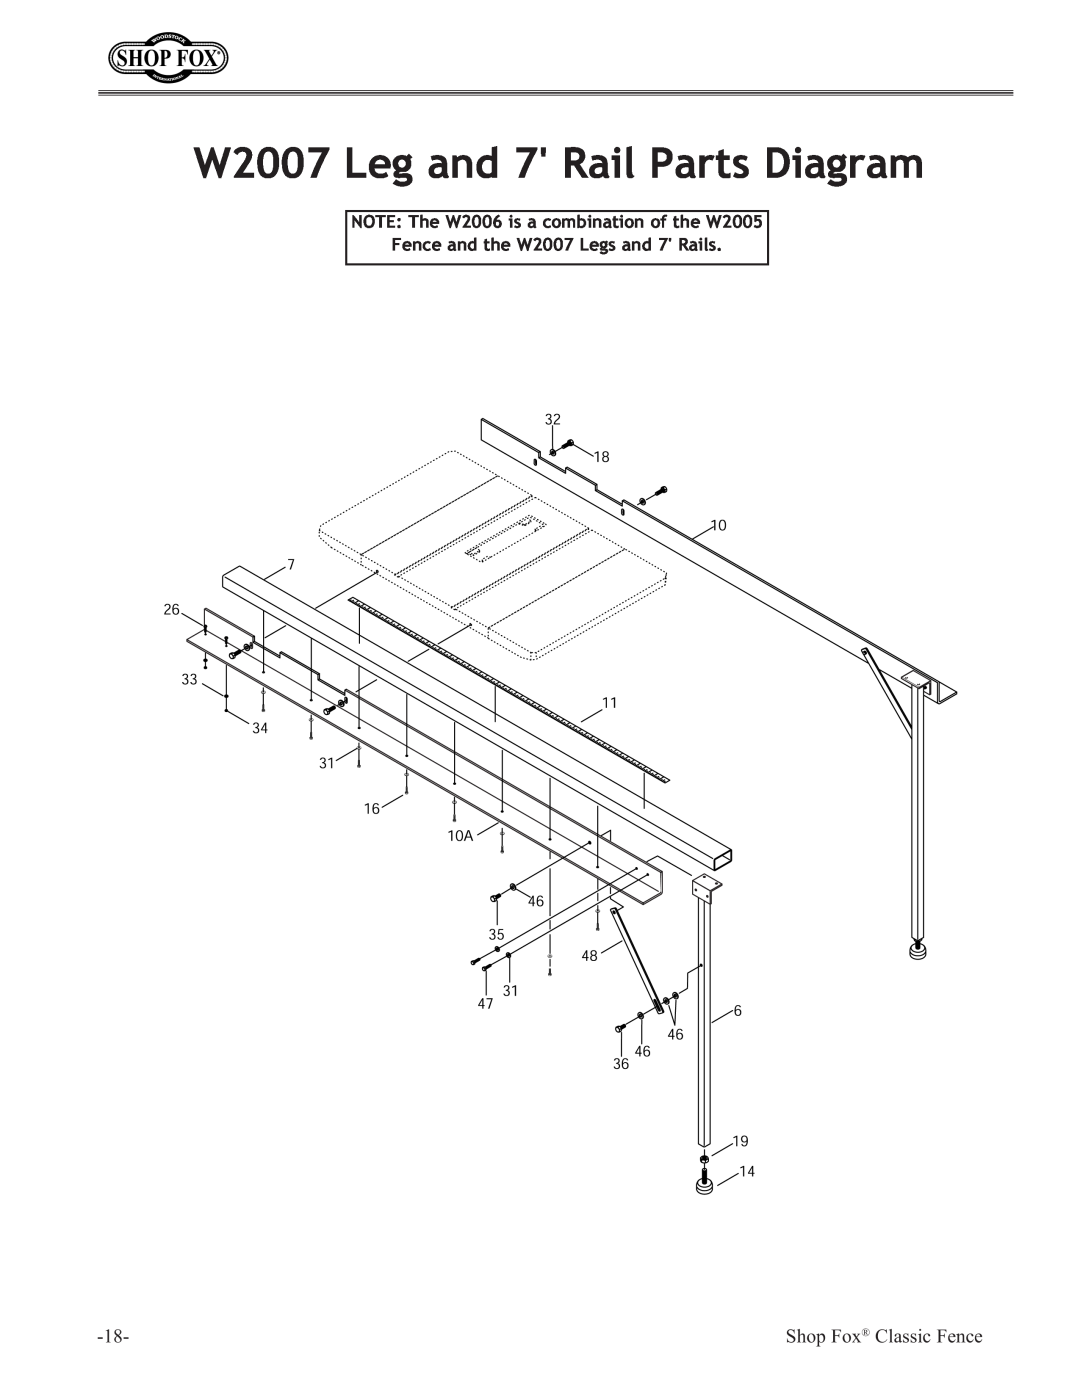 Woodstock W2007 Leg and 7 Rail Parts Diagram, Shop Fox Classic Fence, NOTE The W2006 is a combination of the W2005 